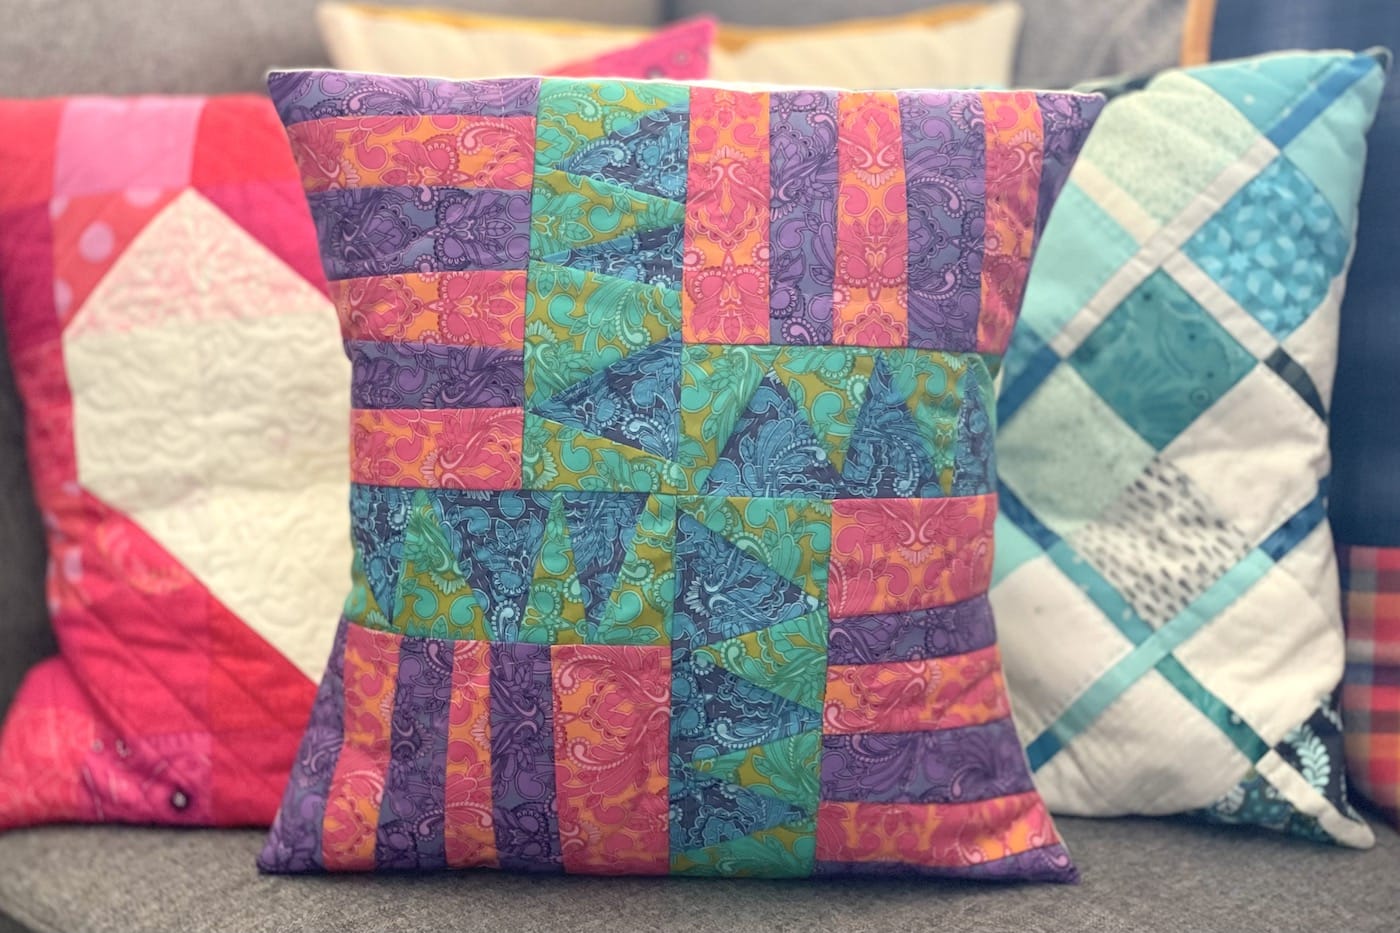 Blue, green, purple and red patchwork pillow on couch